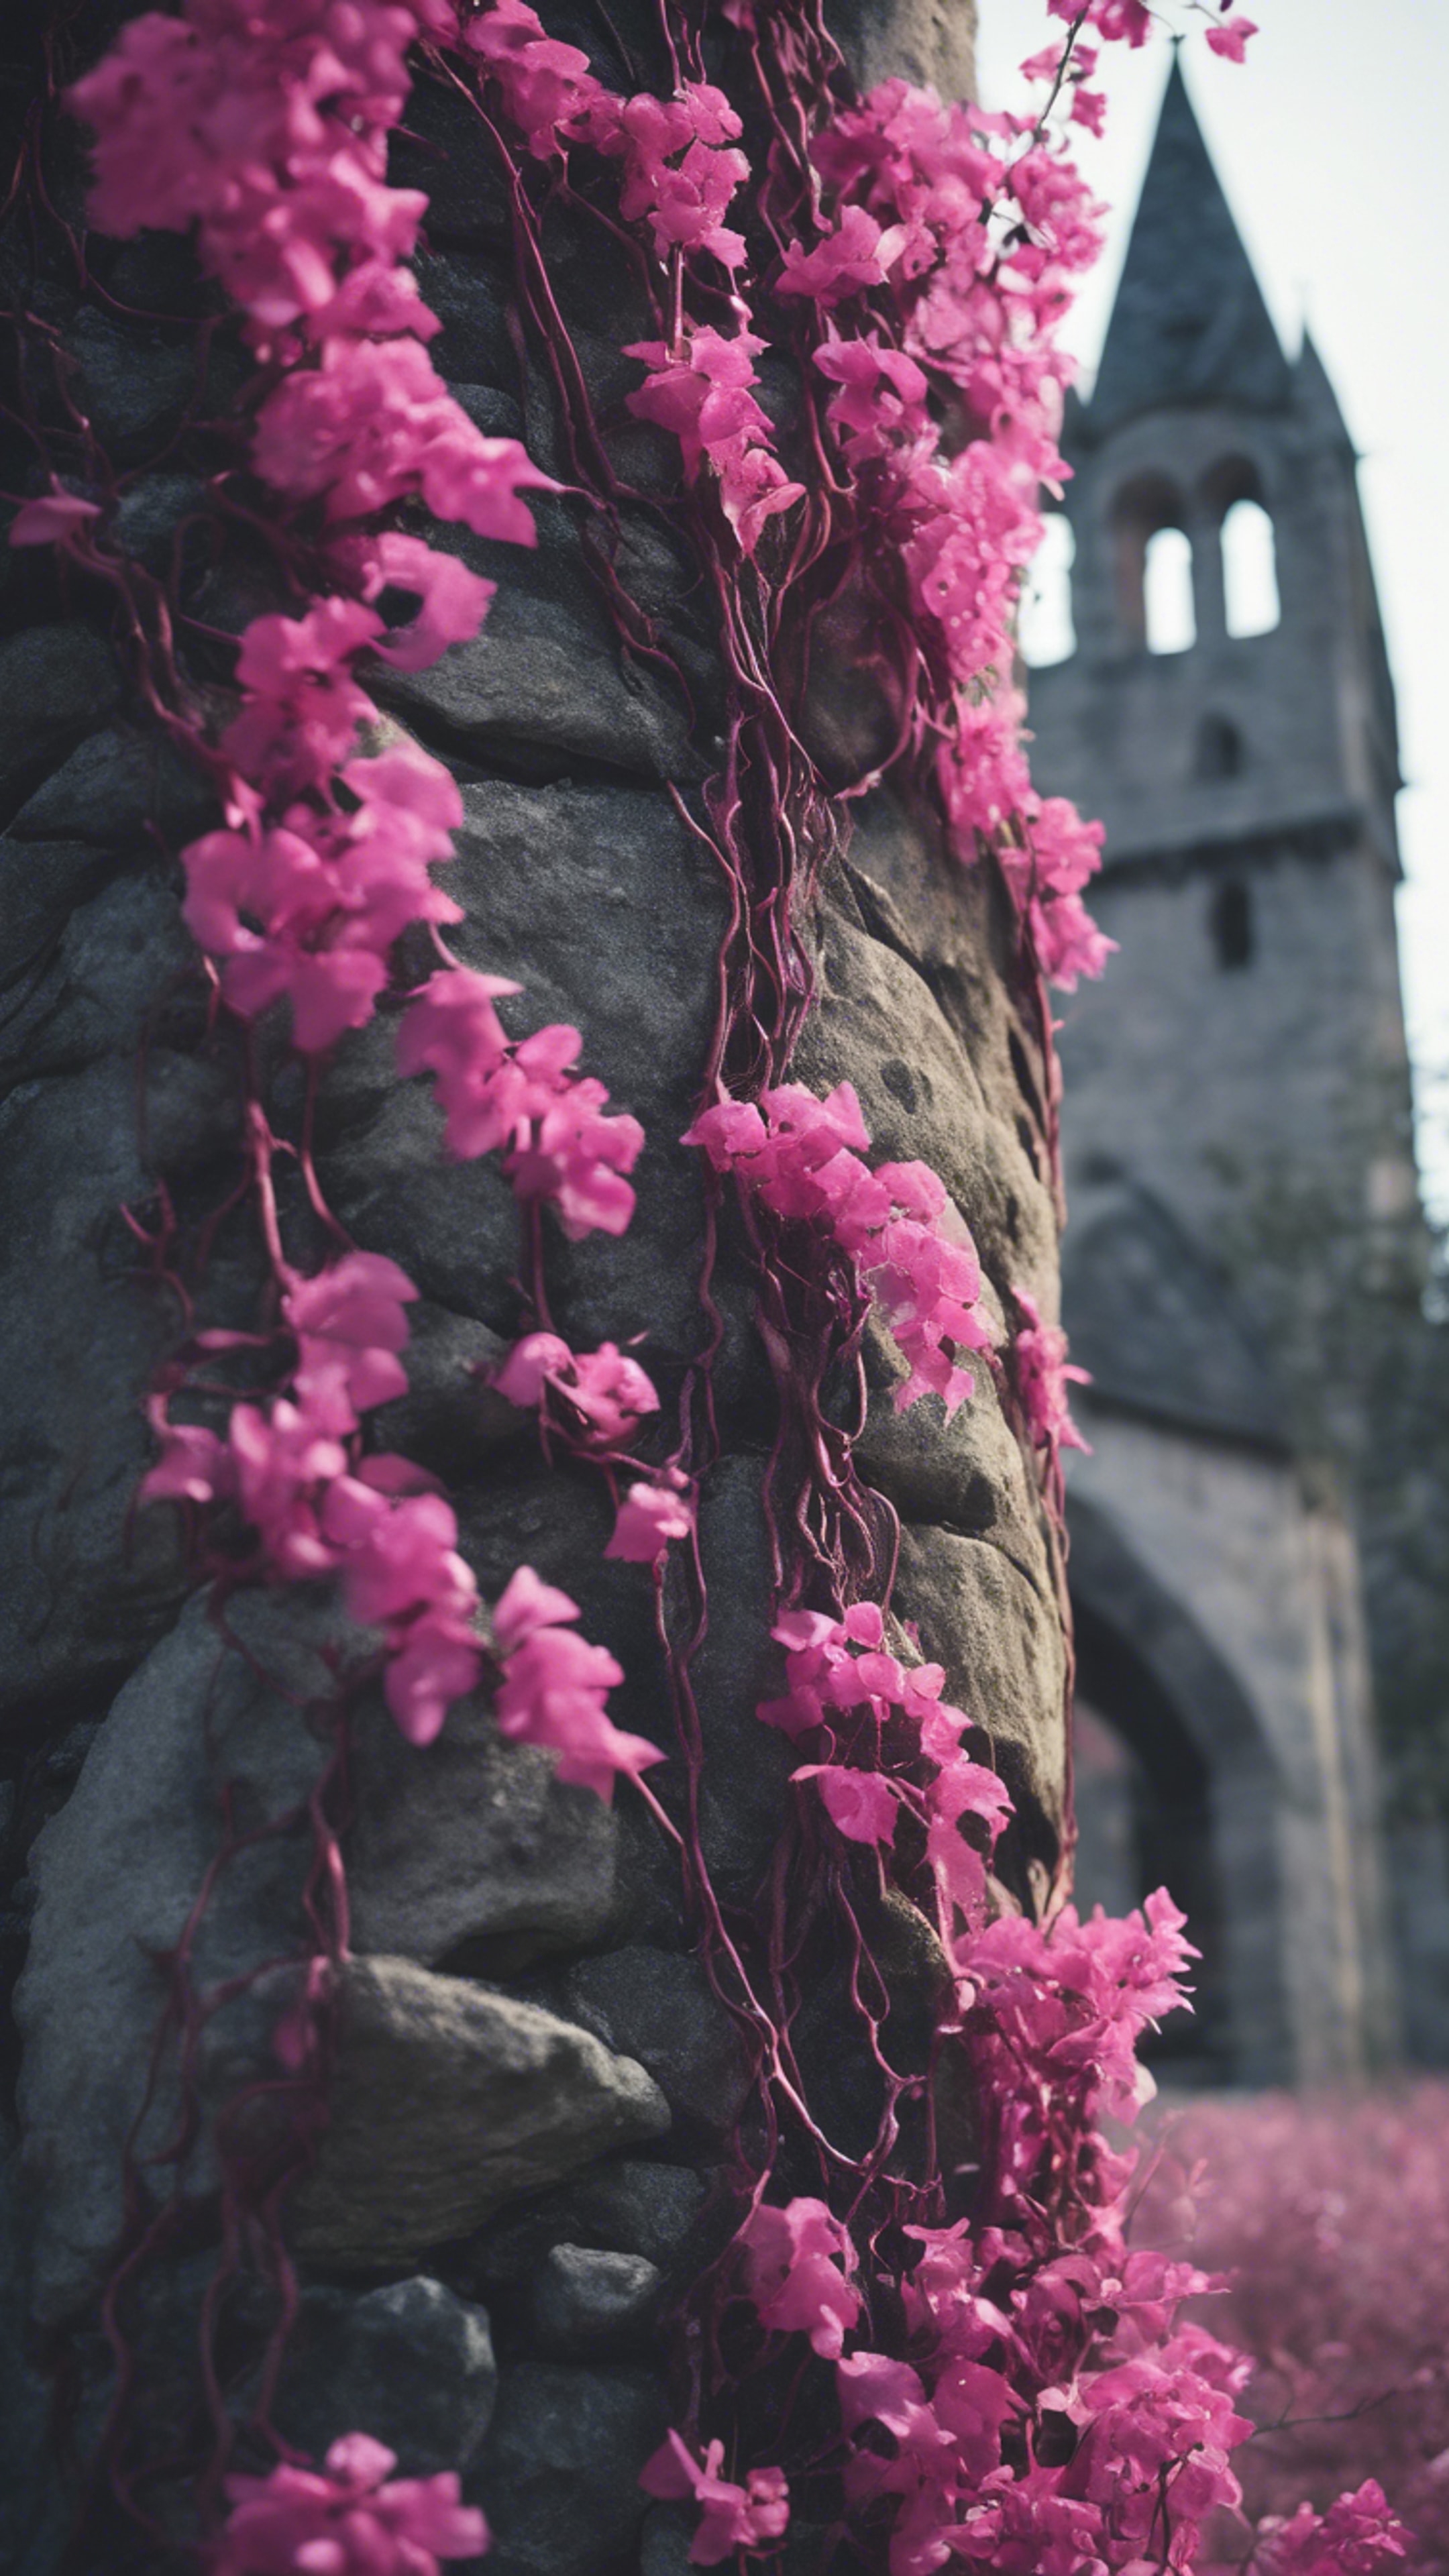 Dark pink Gothic vines creeping up a stone tower. Kertas dinding[2209f0af7d054e0296c9]